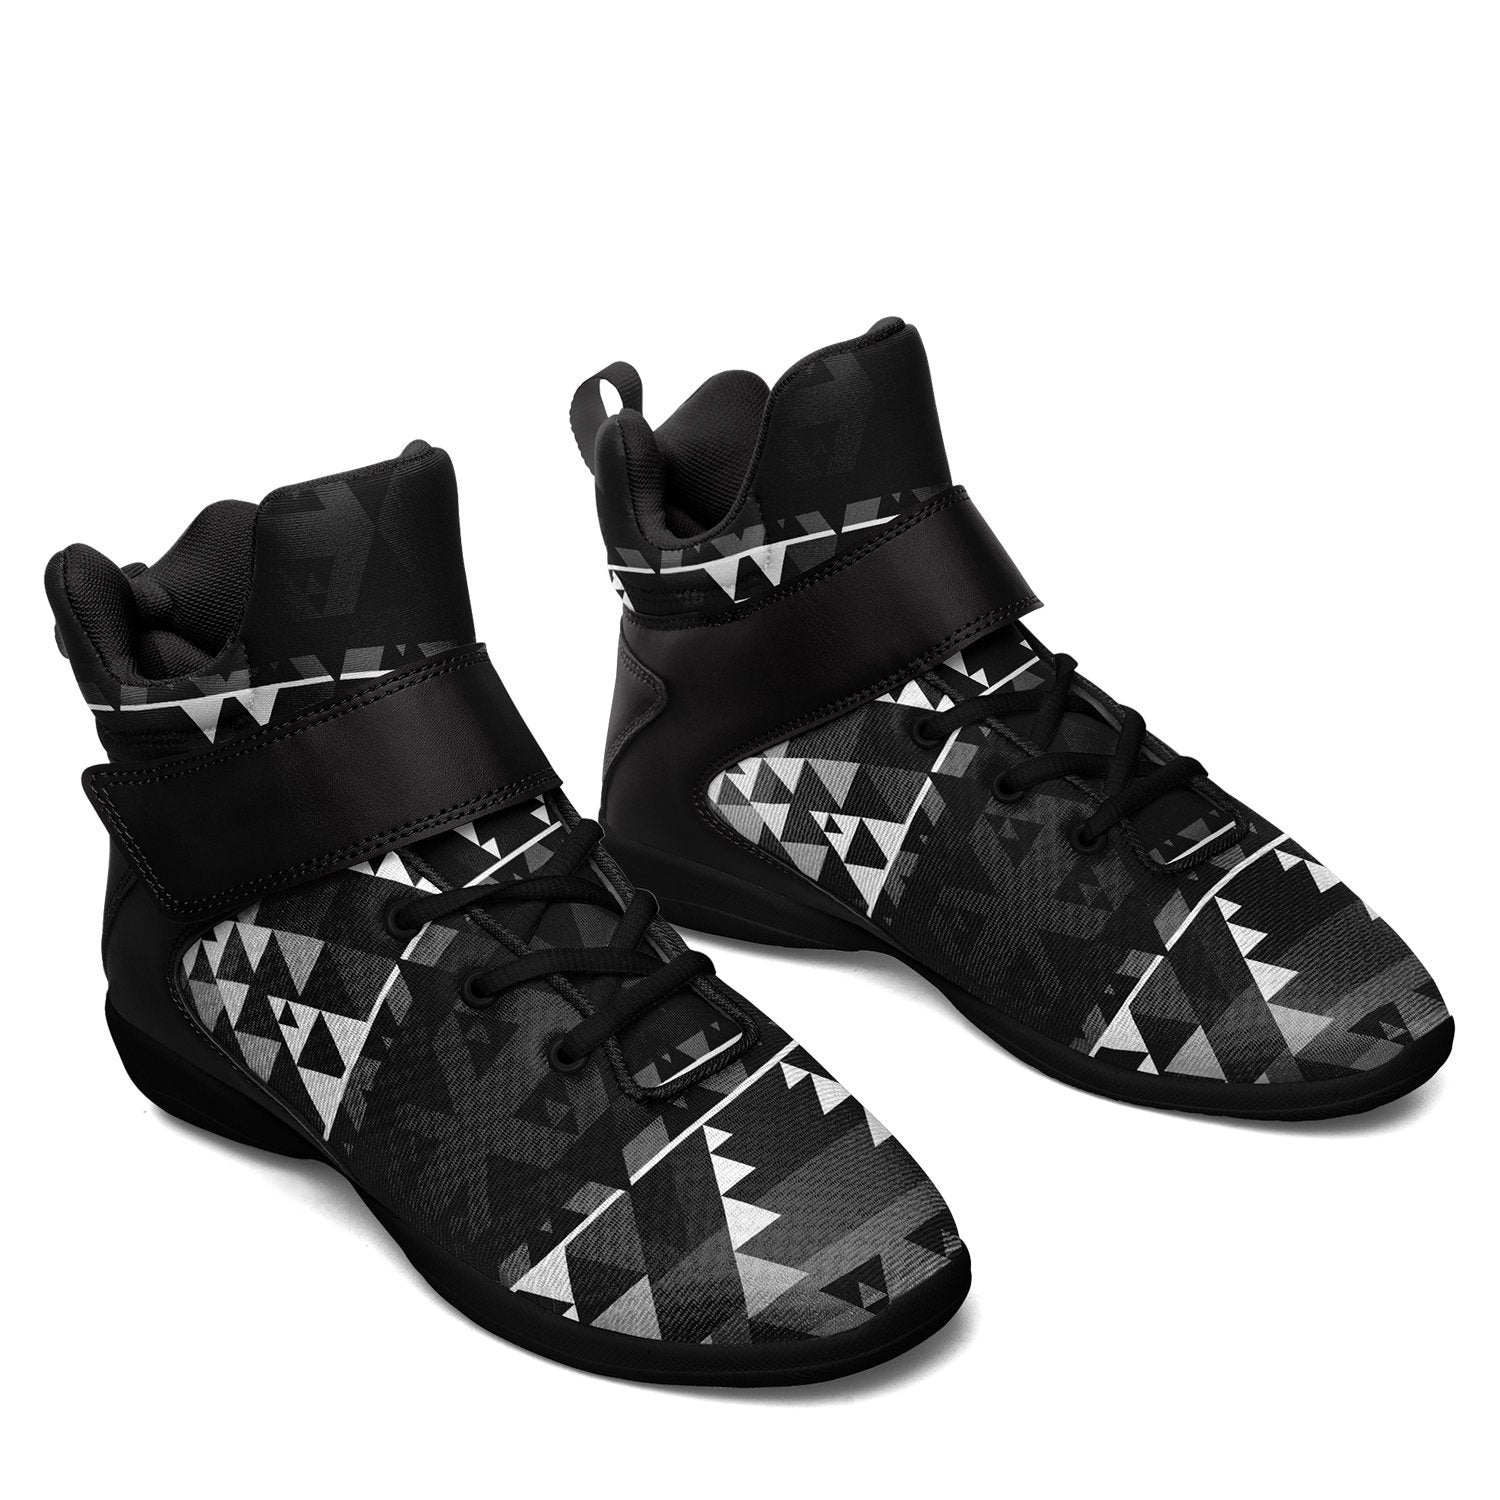 Writing on Stone Black and White Ipottaa Basketball / Sport High Top Shoes - Black Sole 49 Dzine 